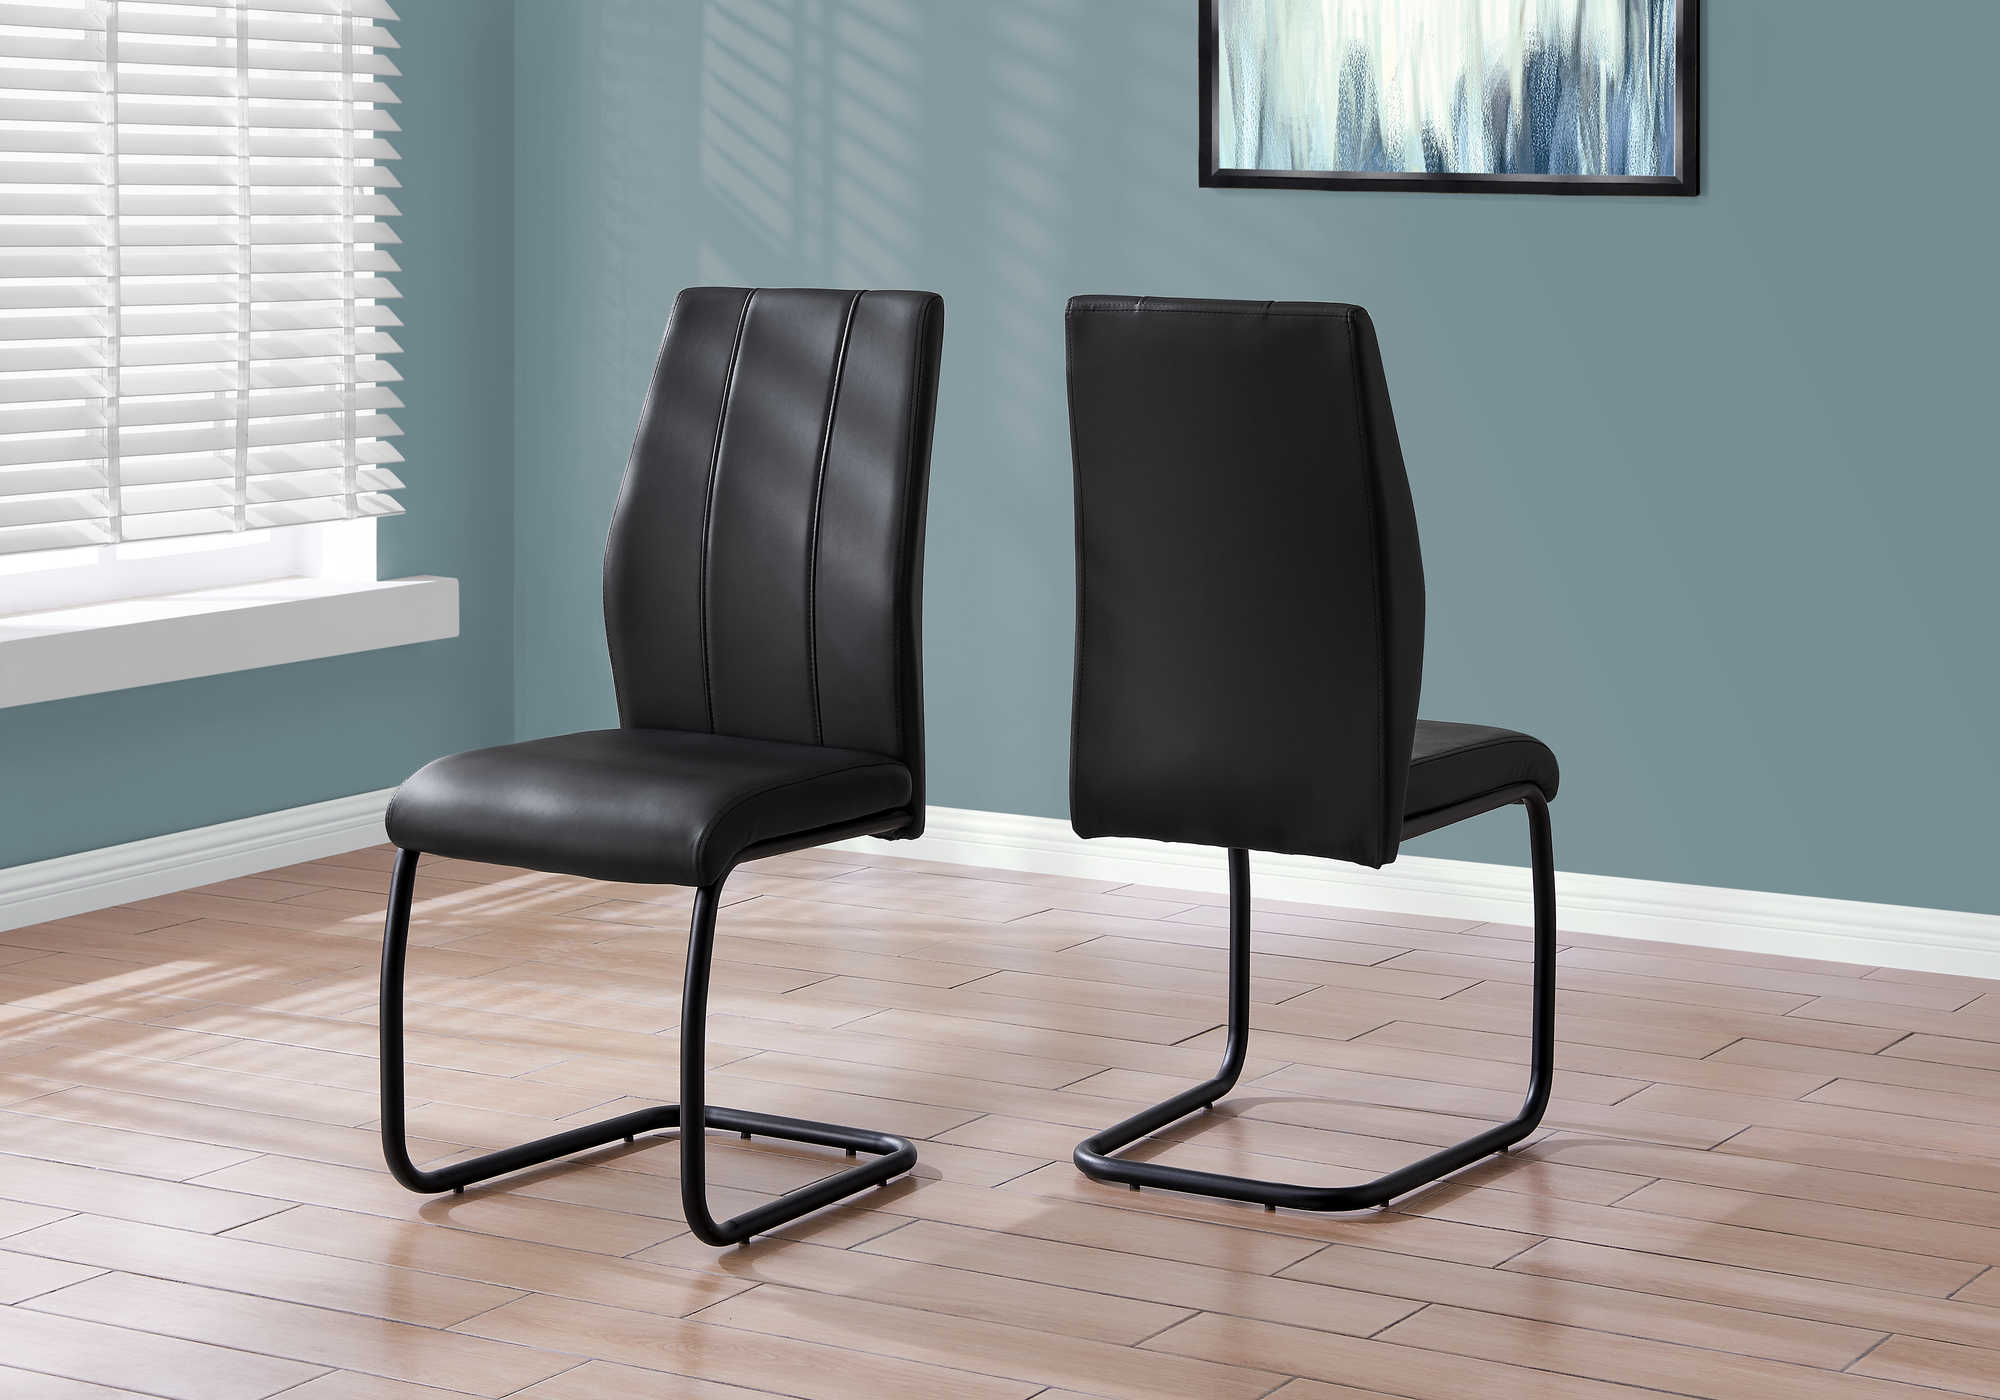 DINING CHAIR - 2PCS / 39"H / BLACK LEATHER-LOOK / METAL